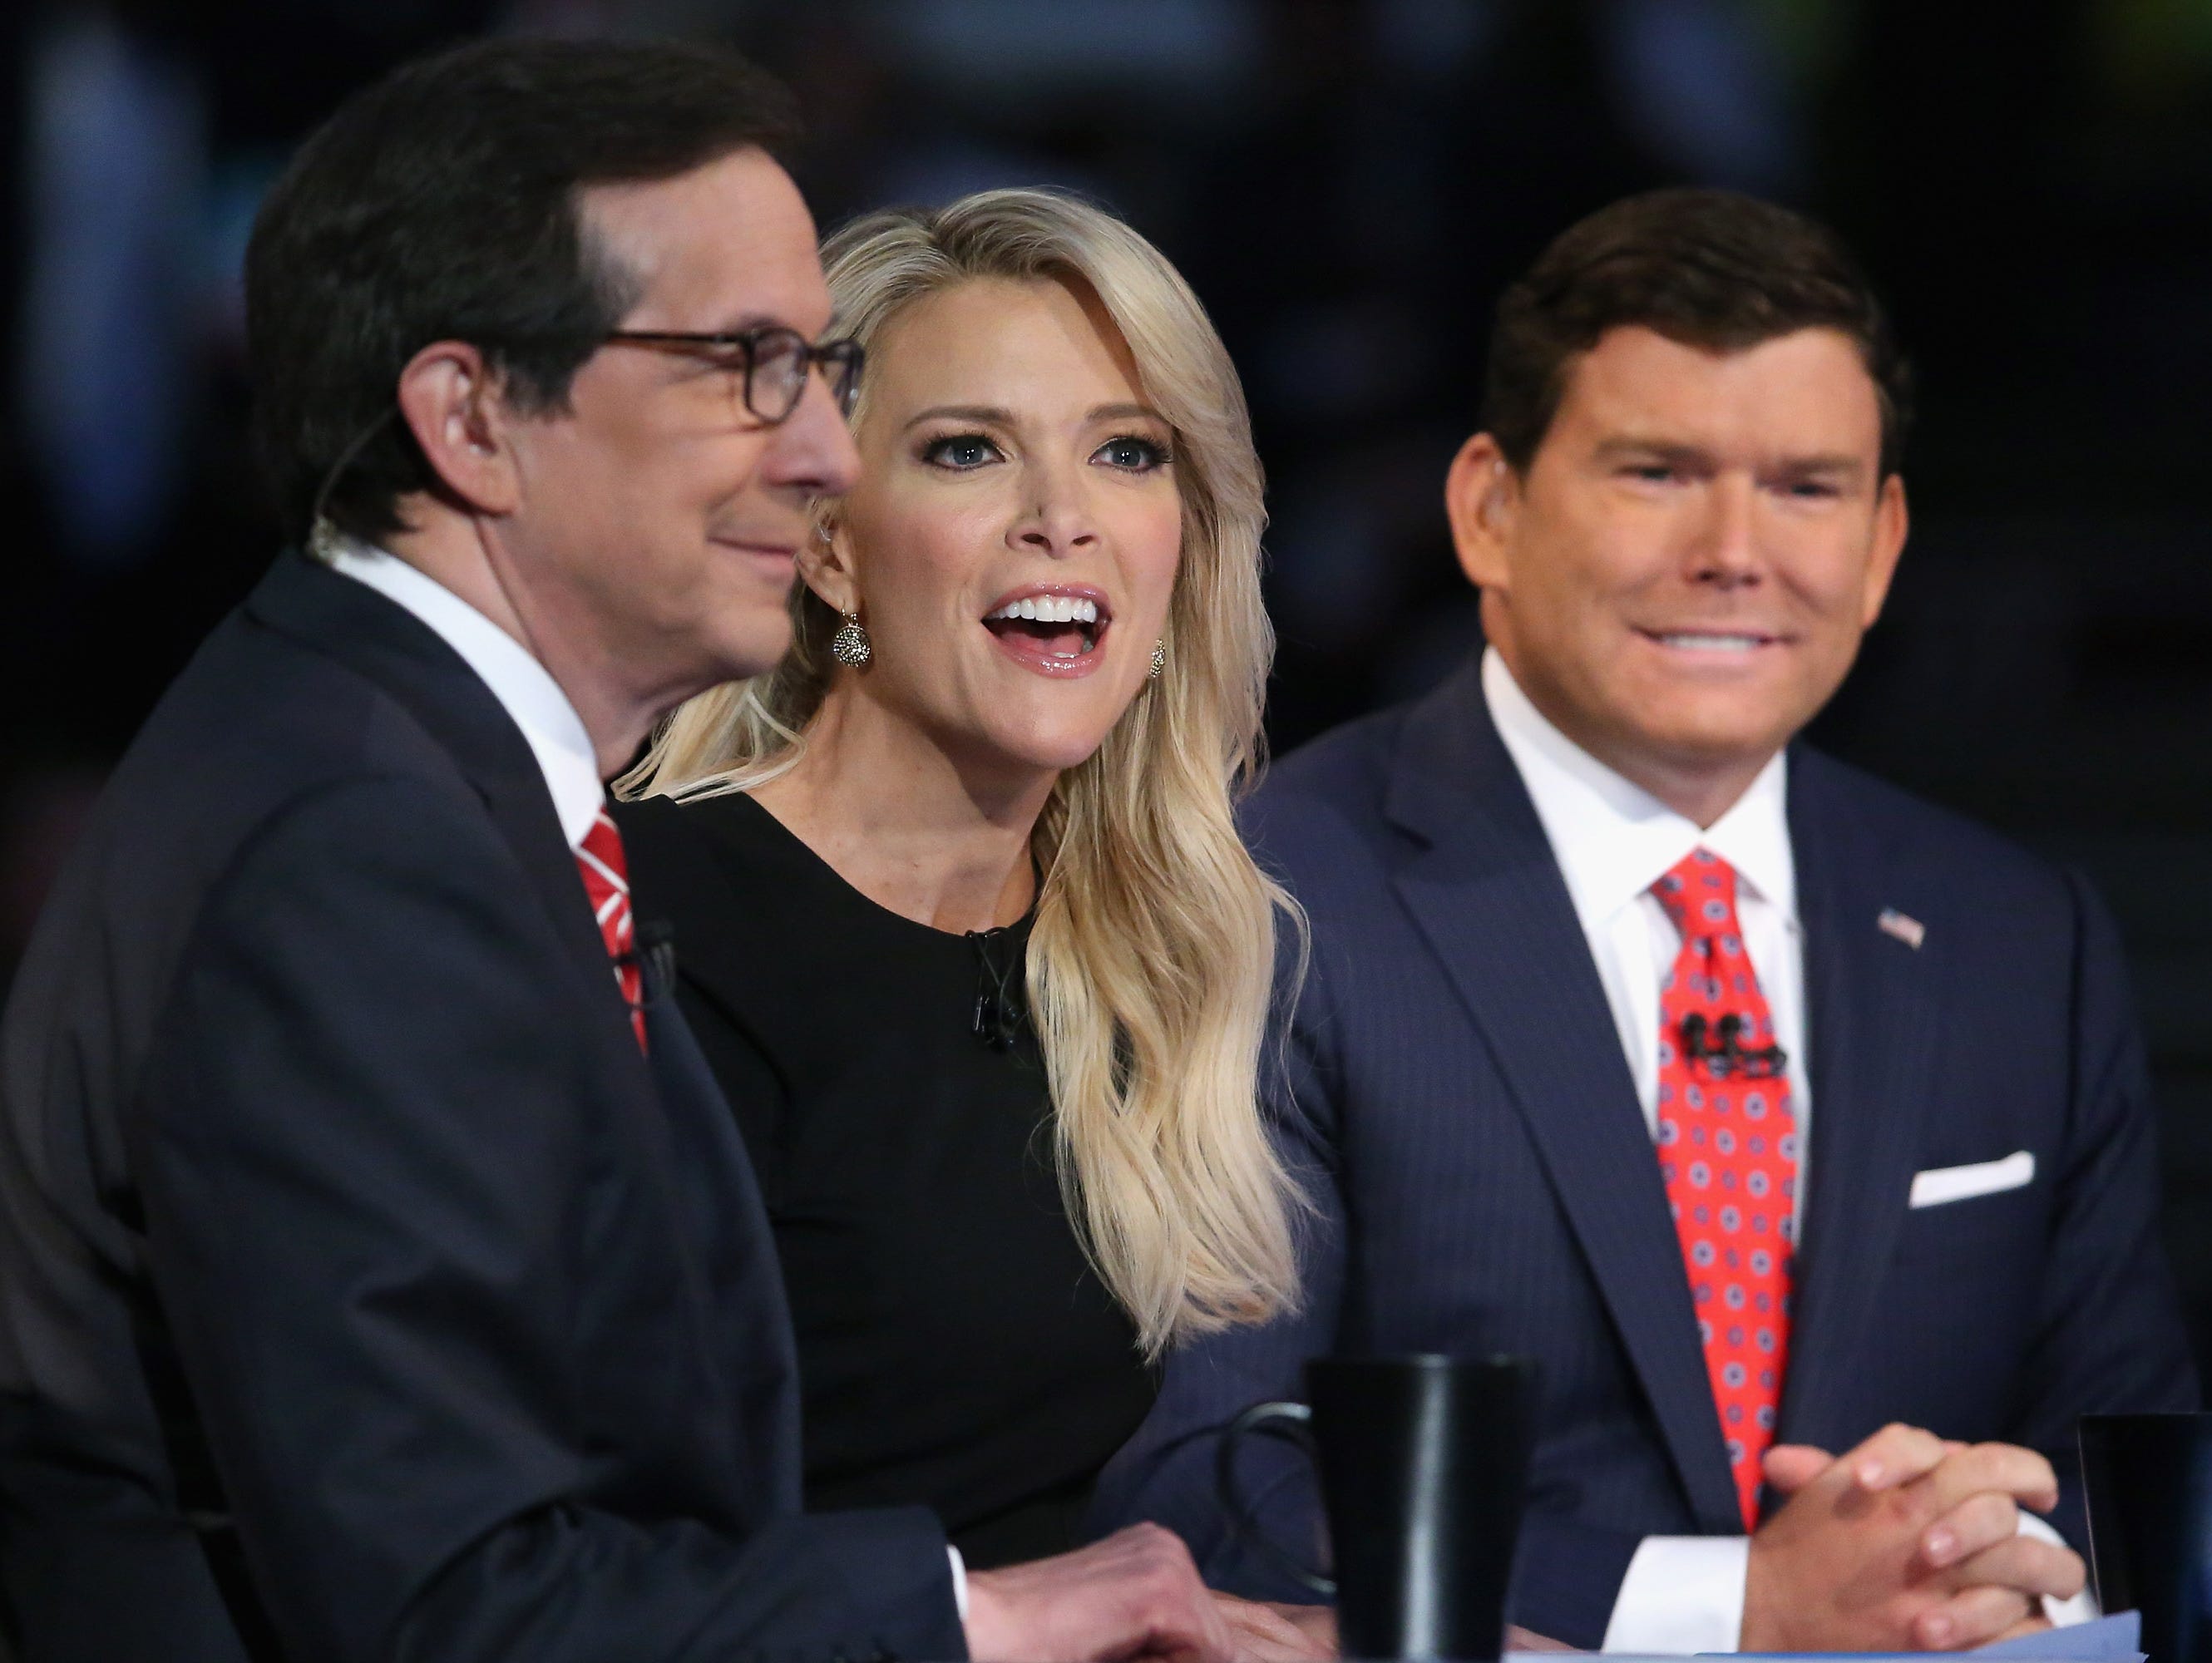 Fox News anchors Chris Wallace, Megyn Kelly and Bret Baier moderate the first prime-time Republican presidential debate at the Quicken Loans Arena August 6, 2015 in Cleveland, Ohio.